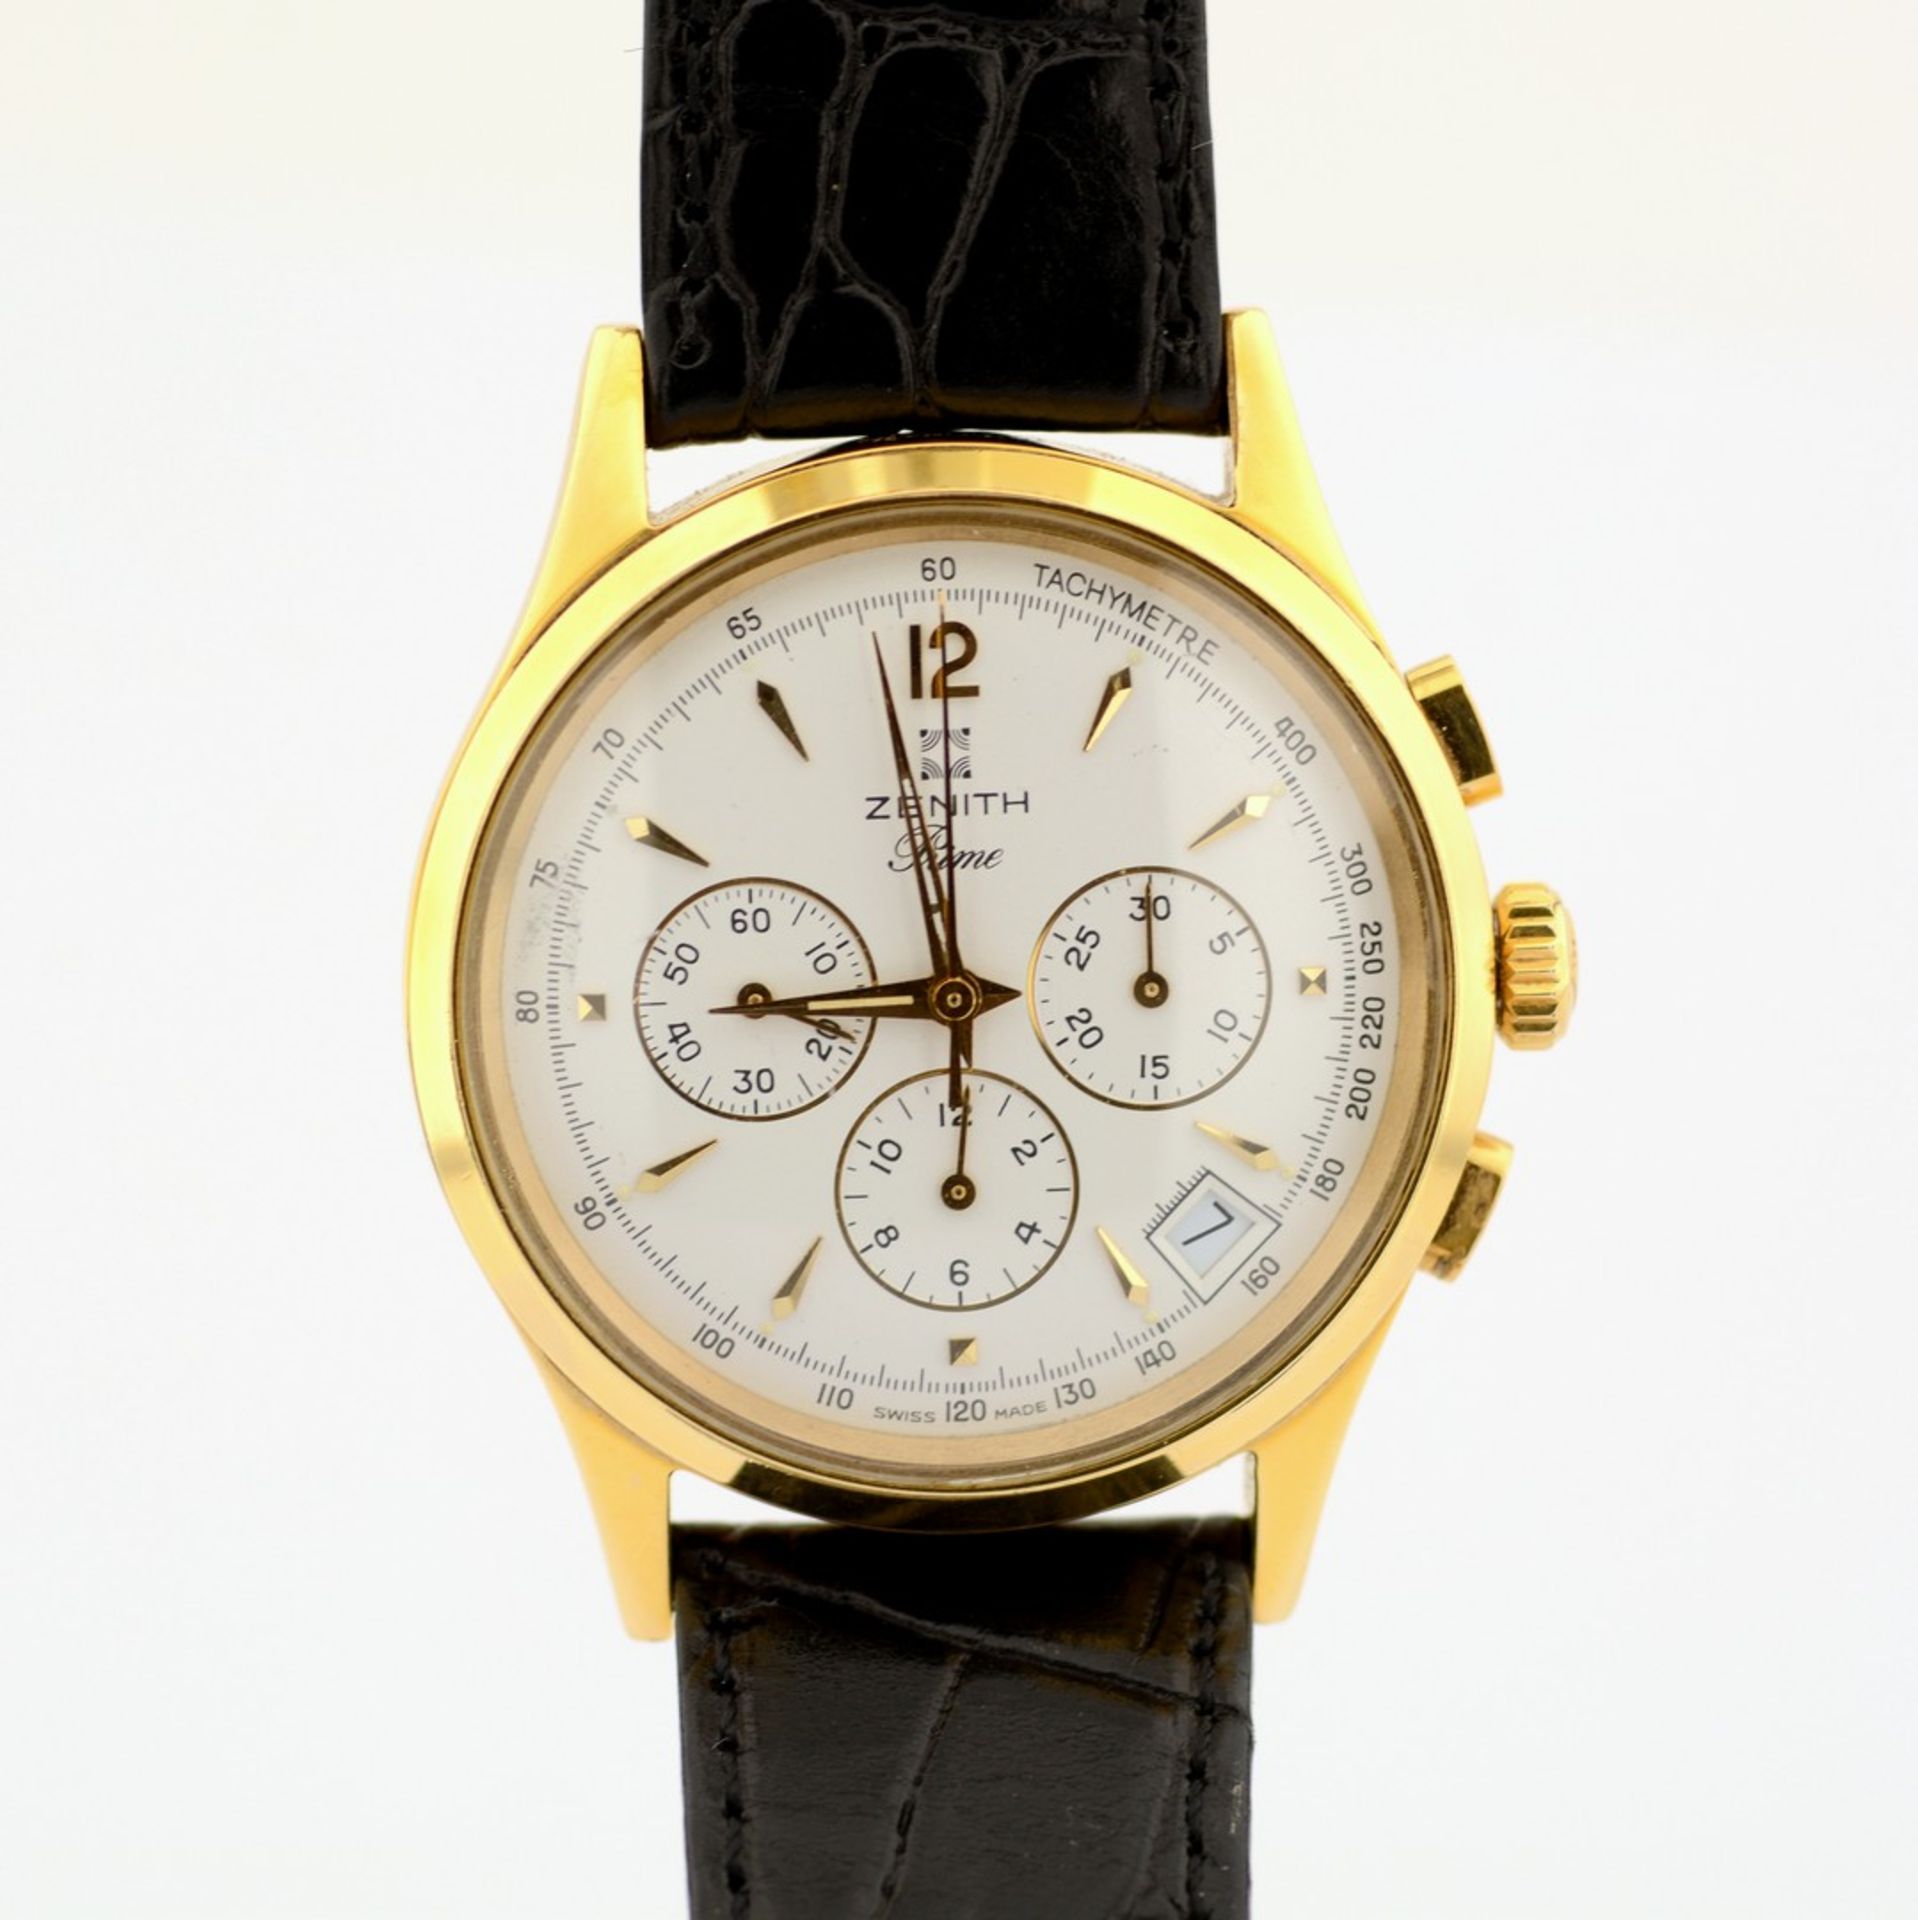 Zenith / Prime Chronograph - Gentlemen's Gold-plated Wristwatch - Image 3 of 8